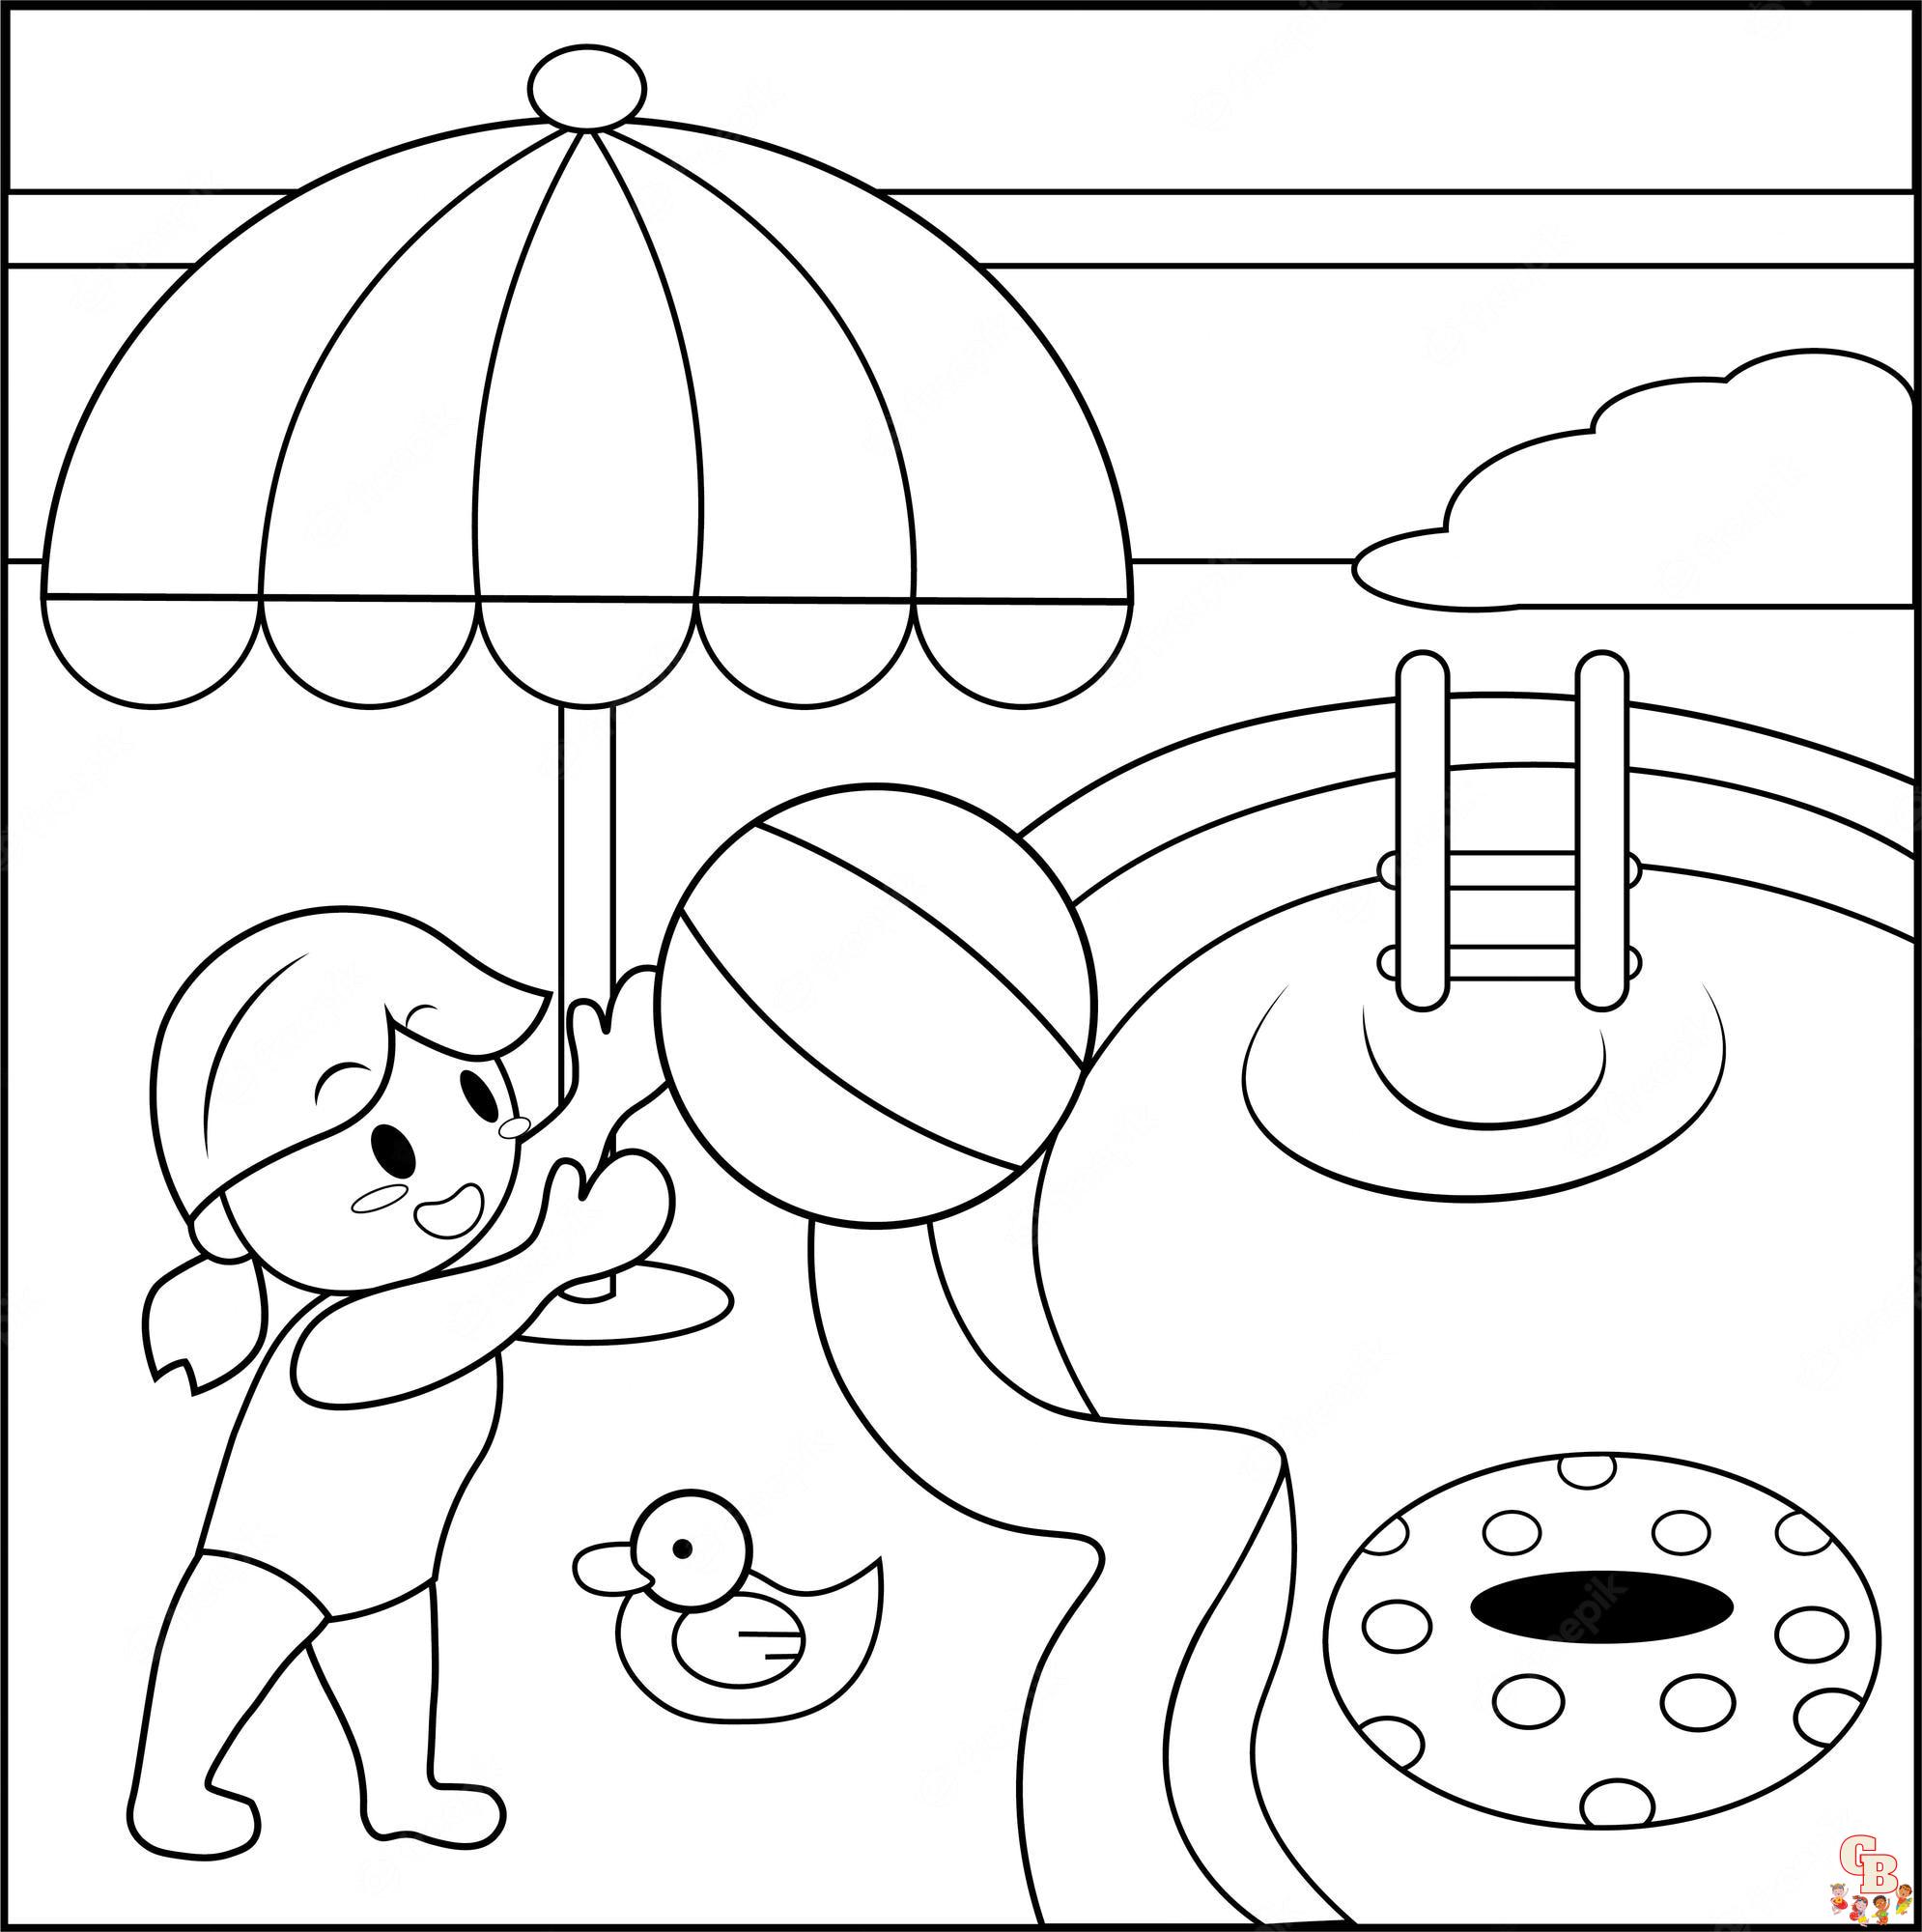 Dive into fun with swimming pool coloring pages